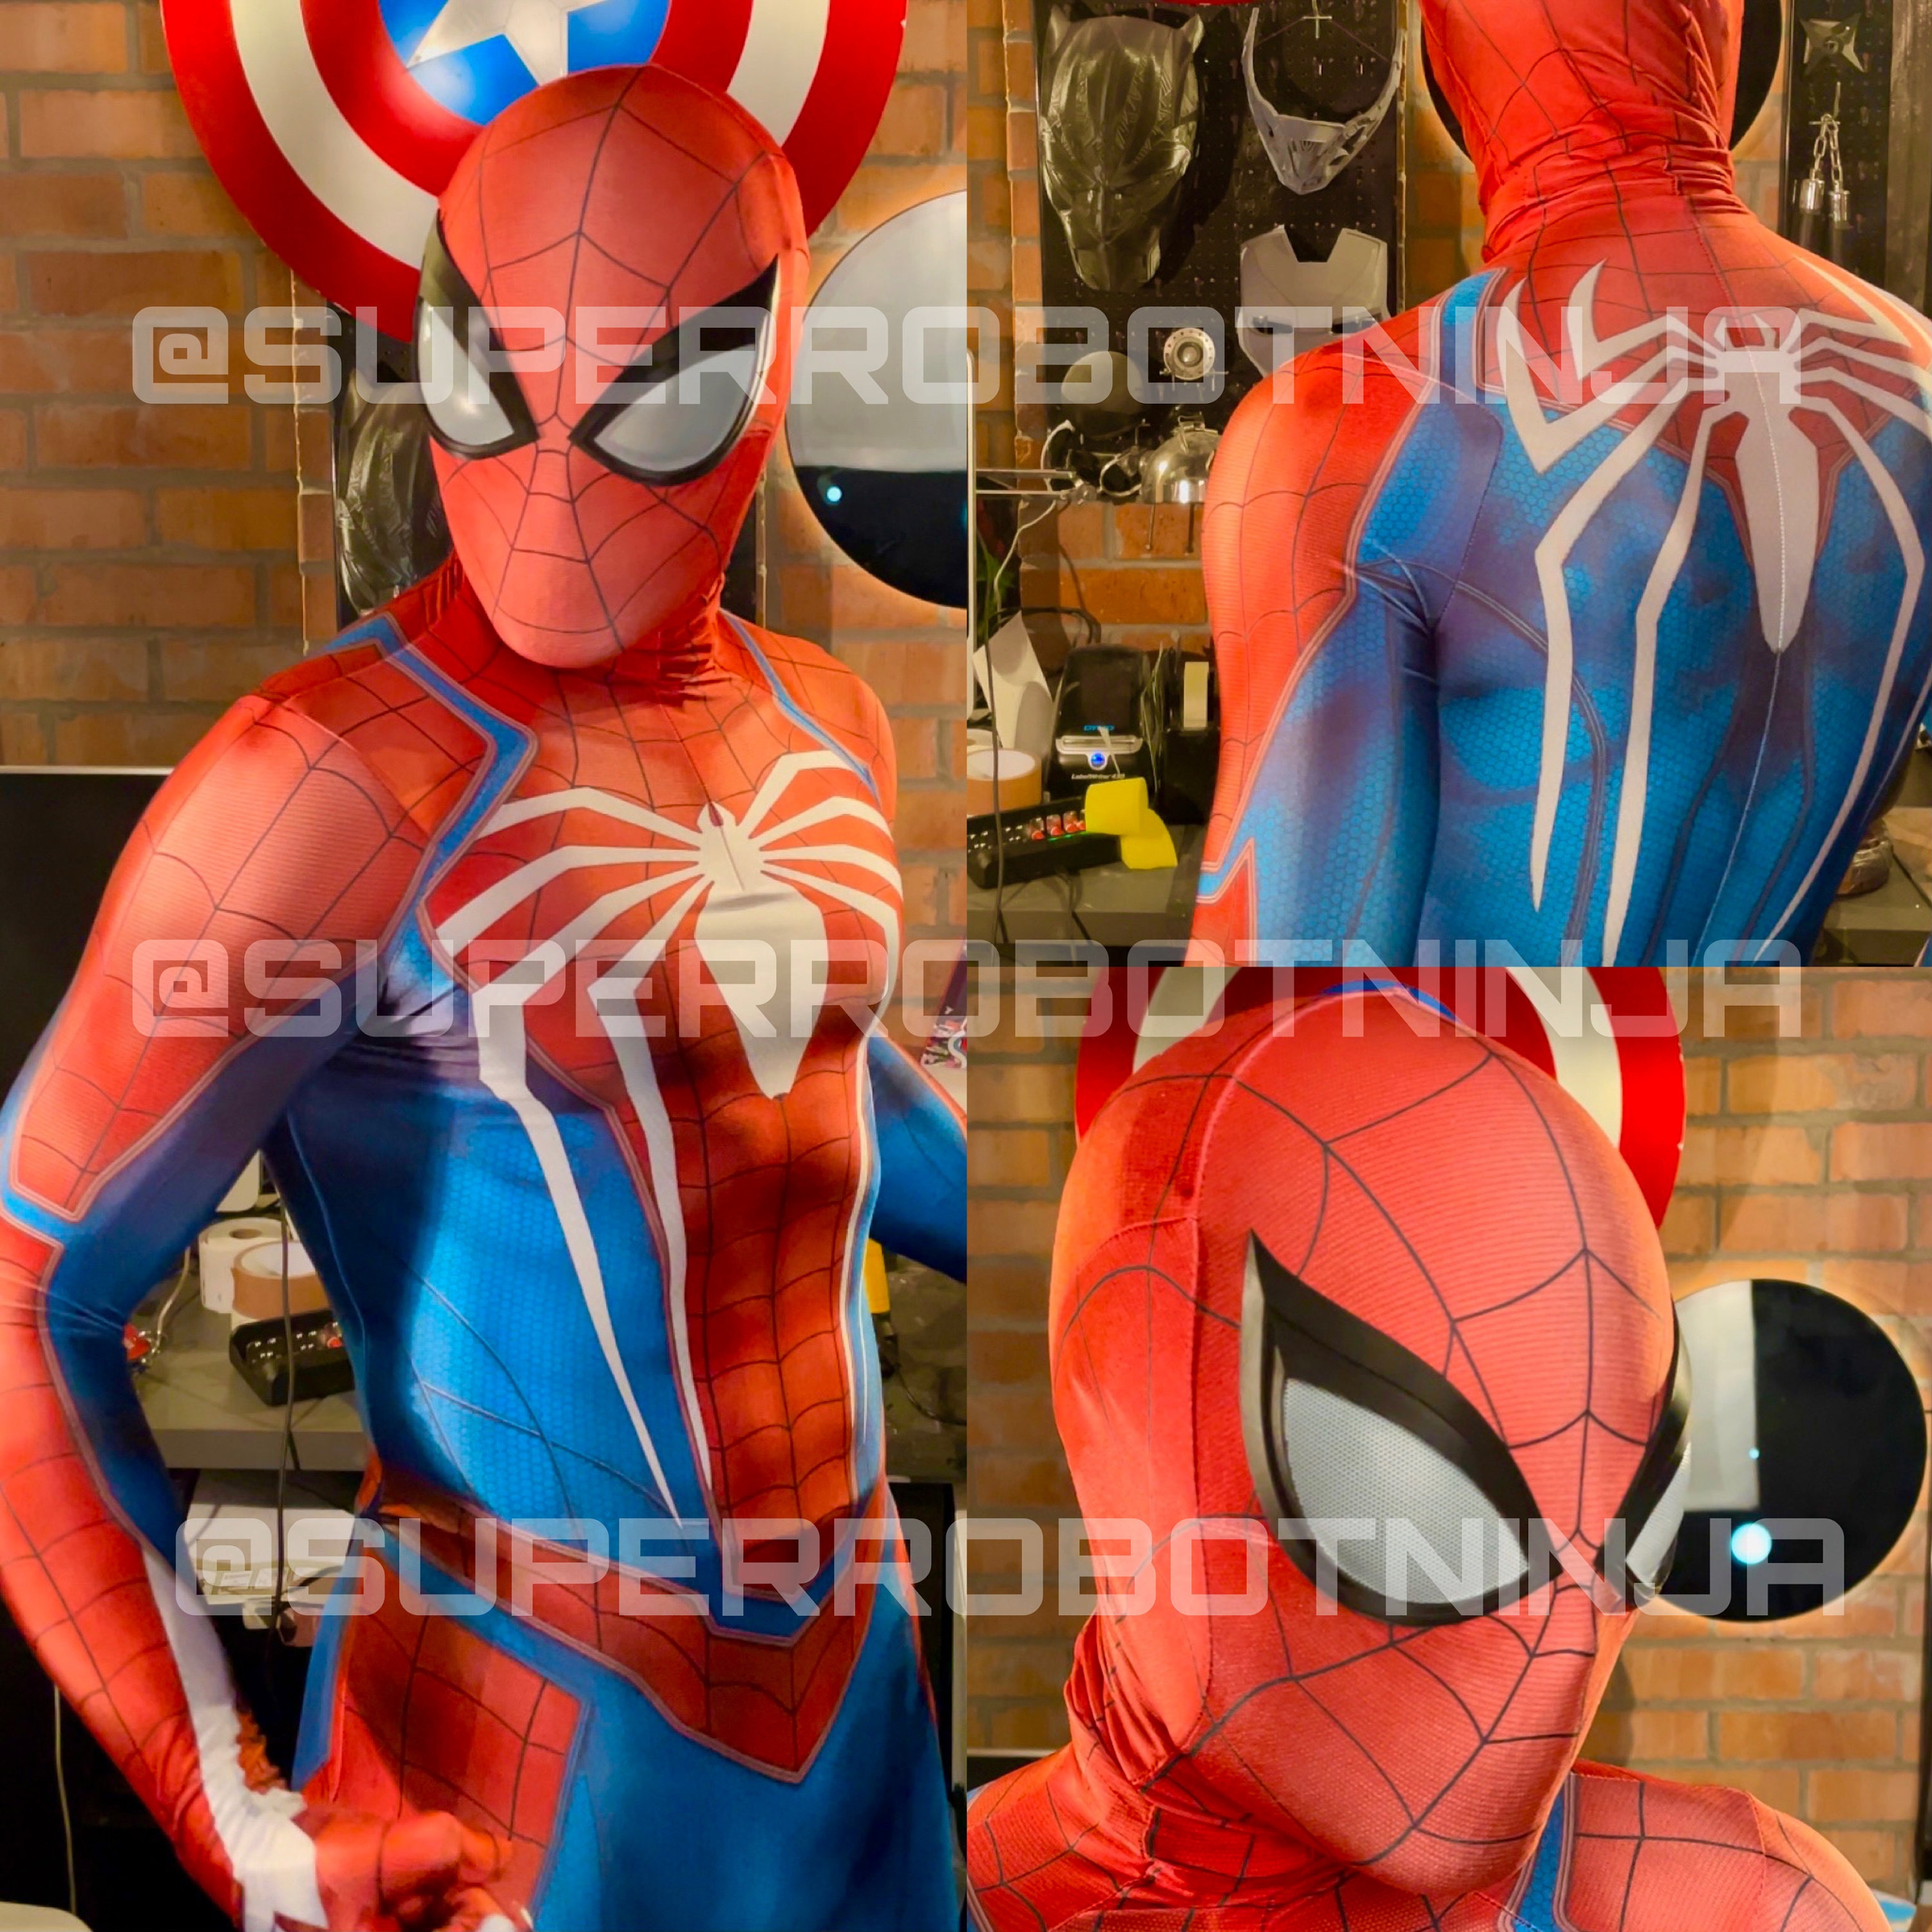 Exclusive: Slick New Spider-Man PS4 Art by Plush Art Club